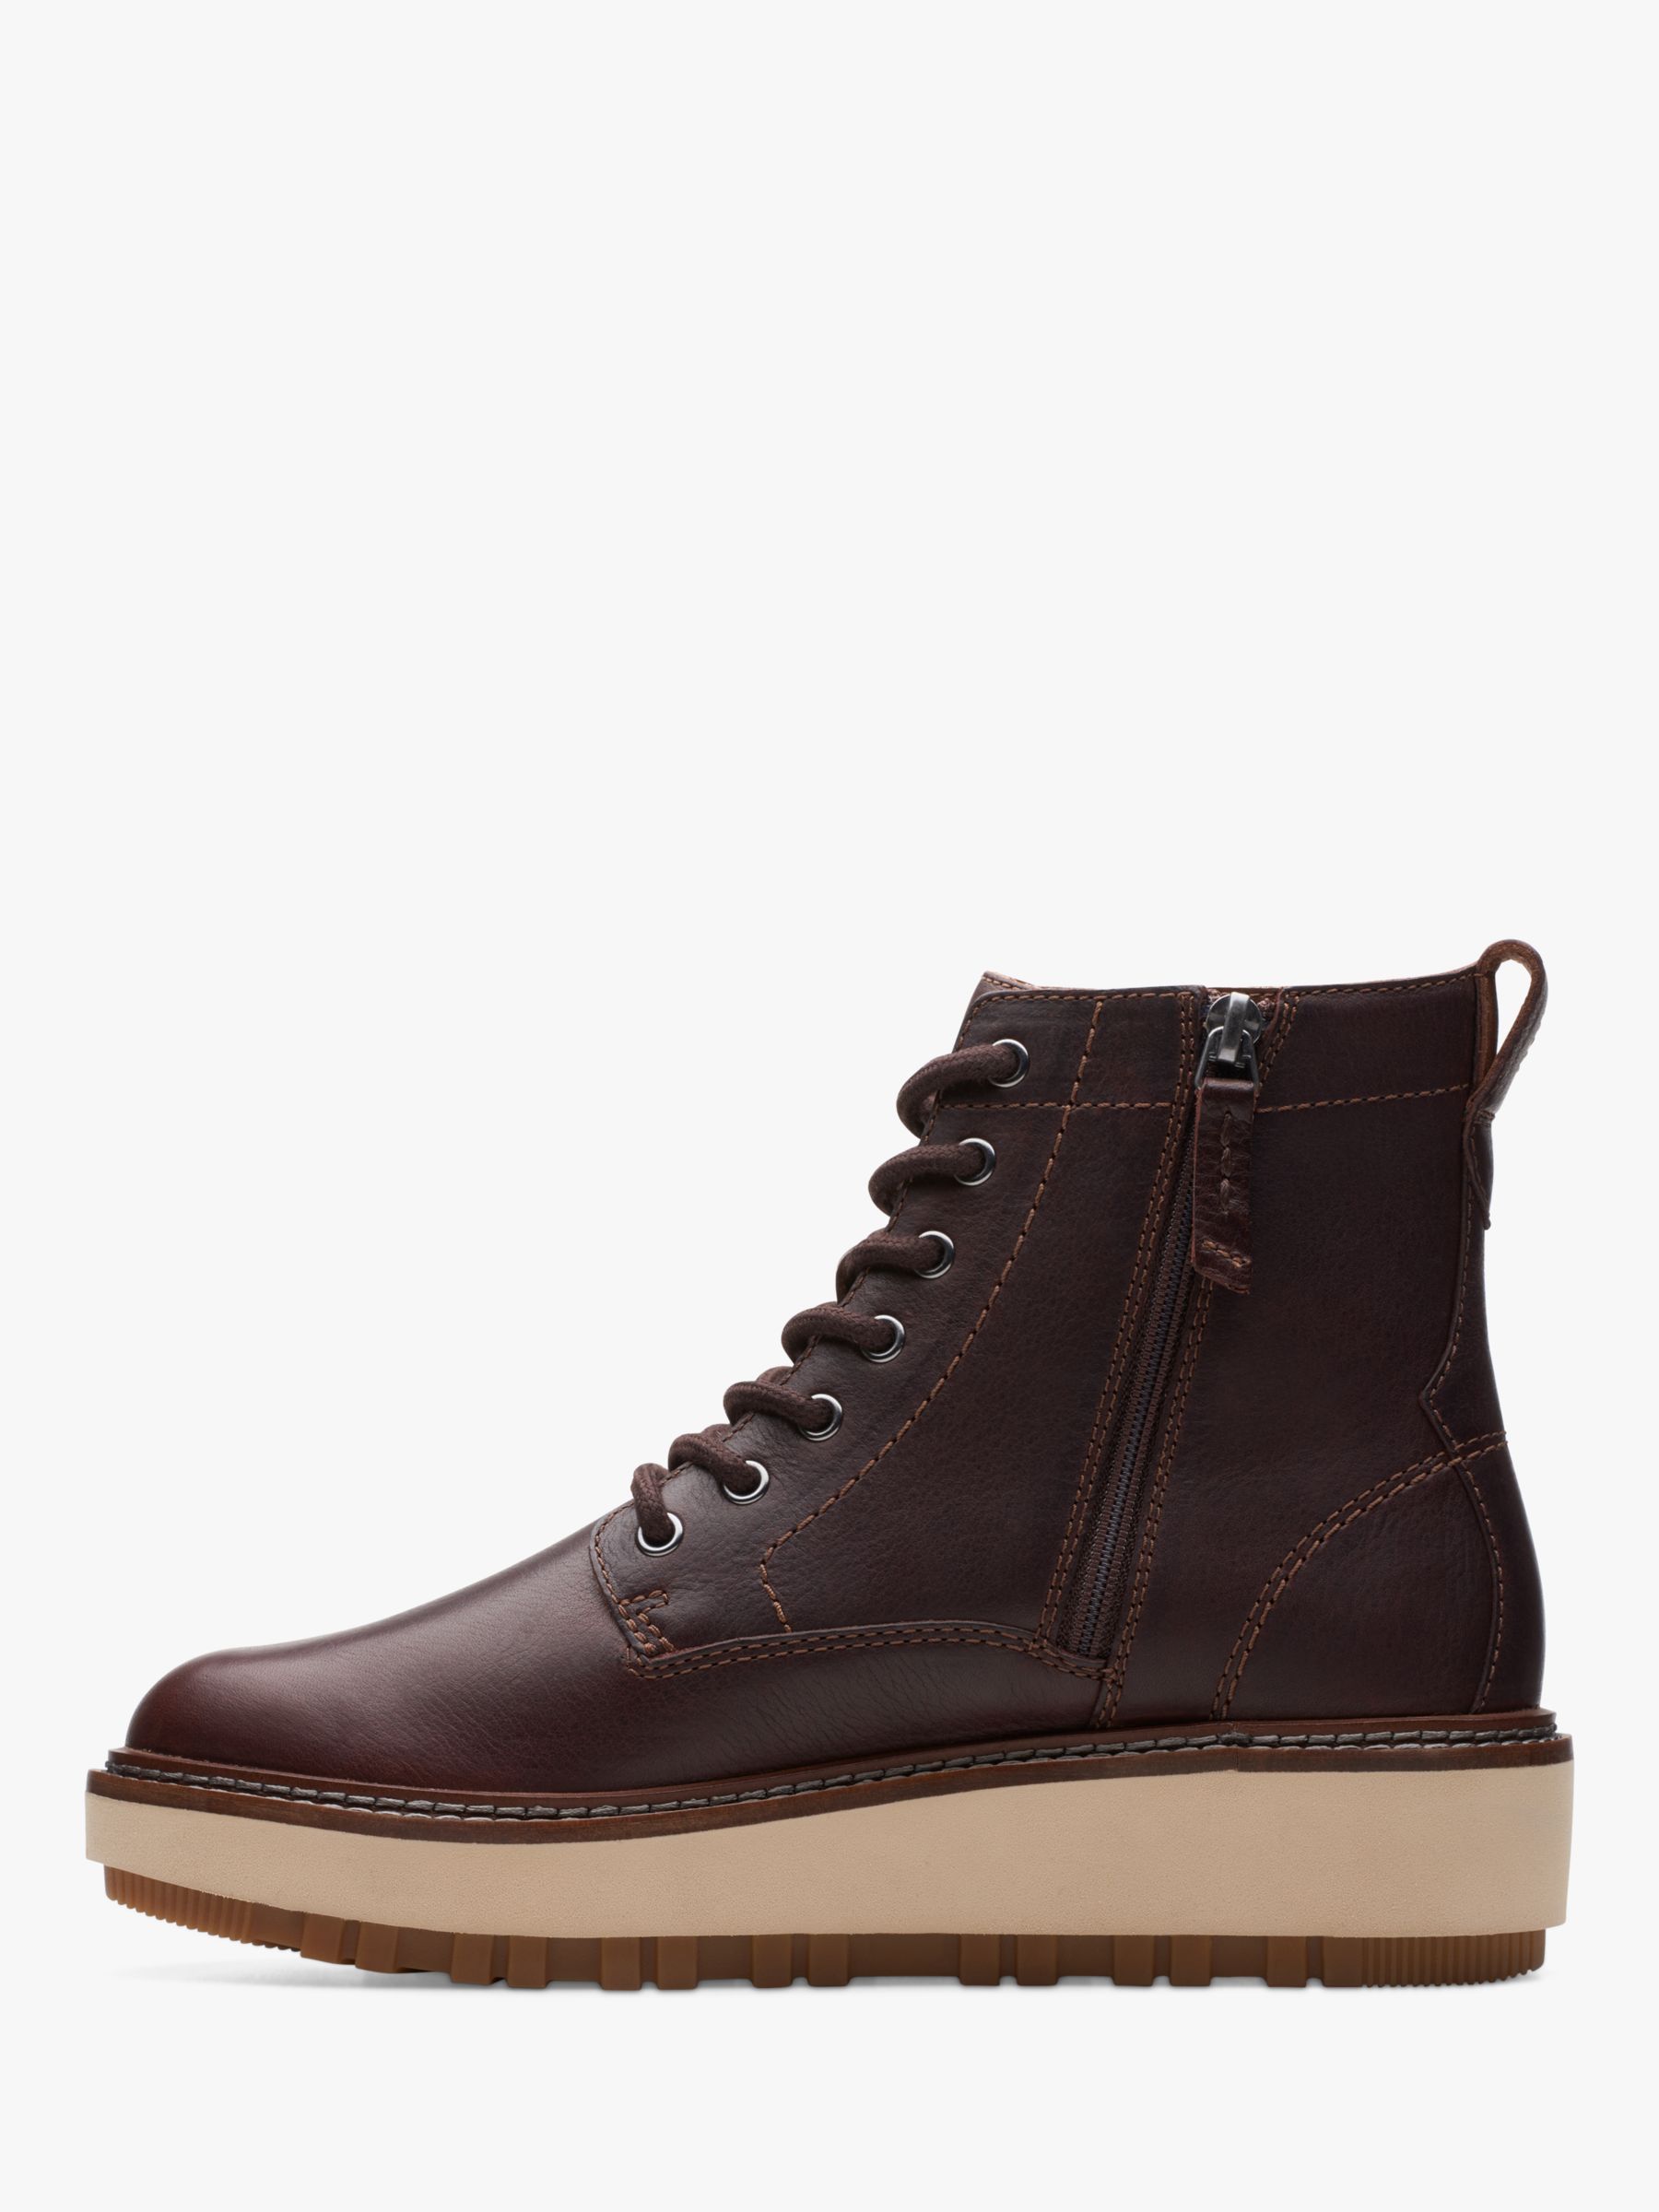 Clarks Orianna Leather Lace Up Ankle Boots, Dark Brown at John Lewis ...